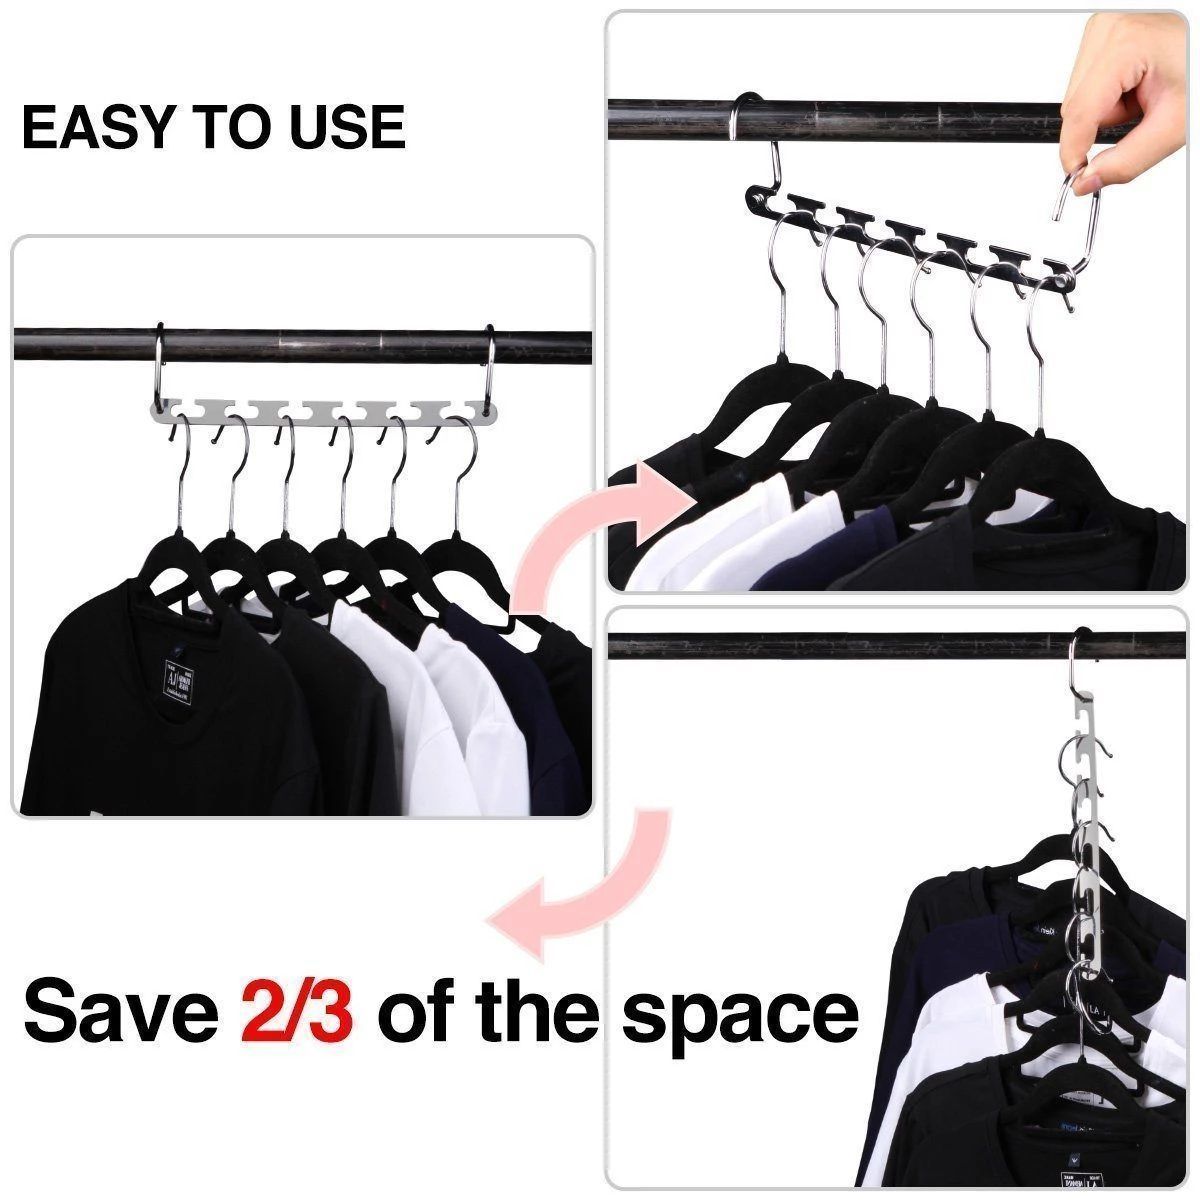 Magic Clothes Stainless Steel Hangers